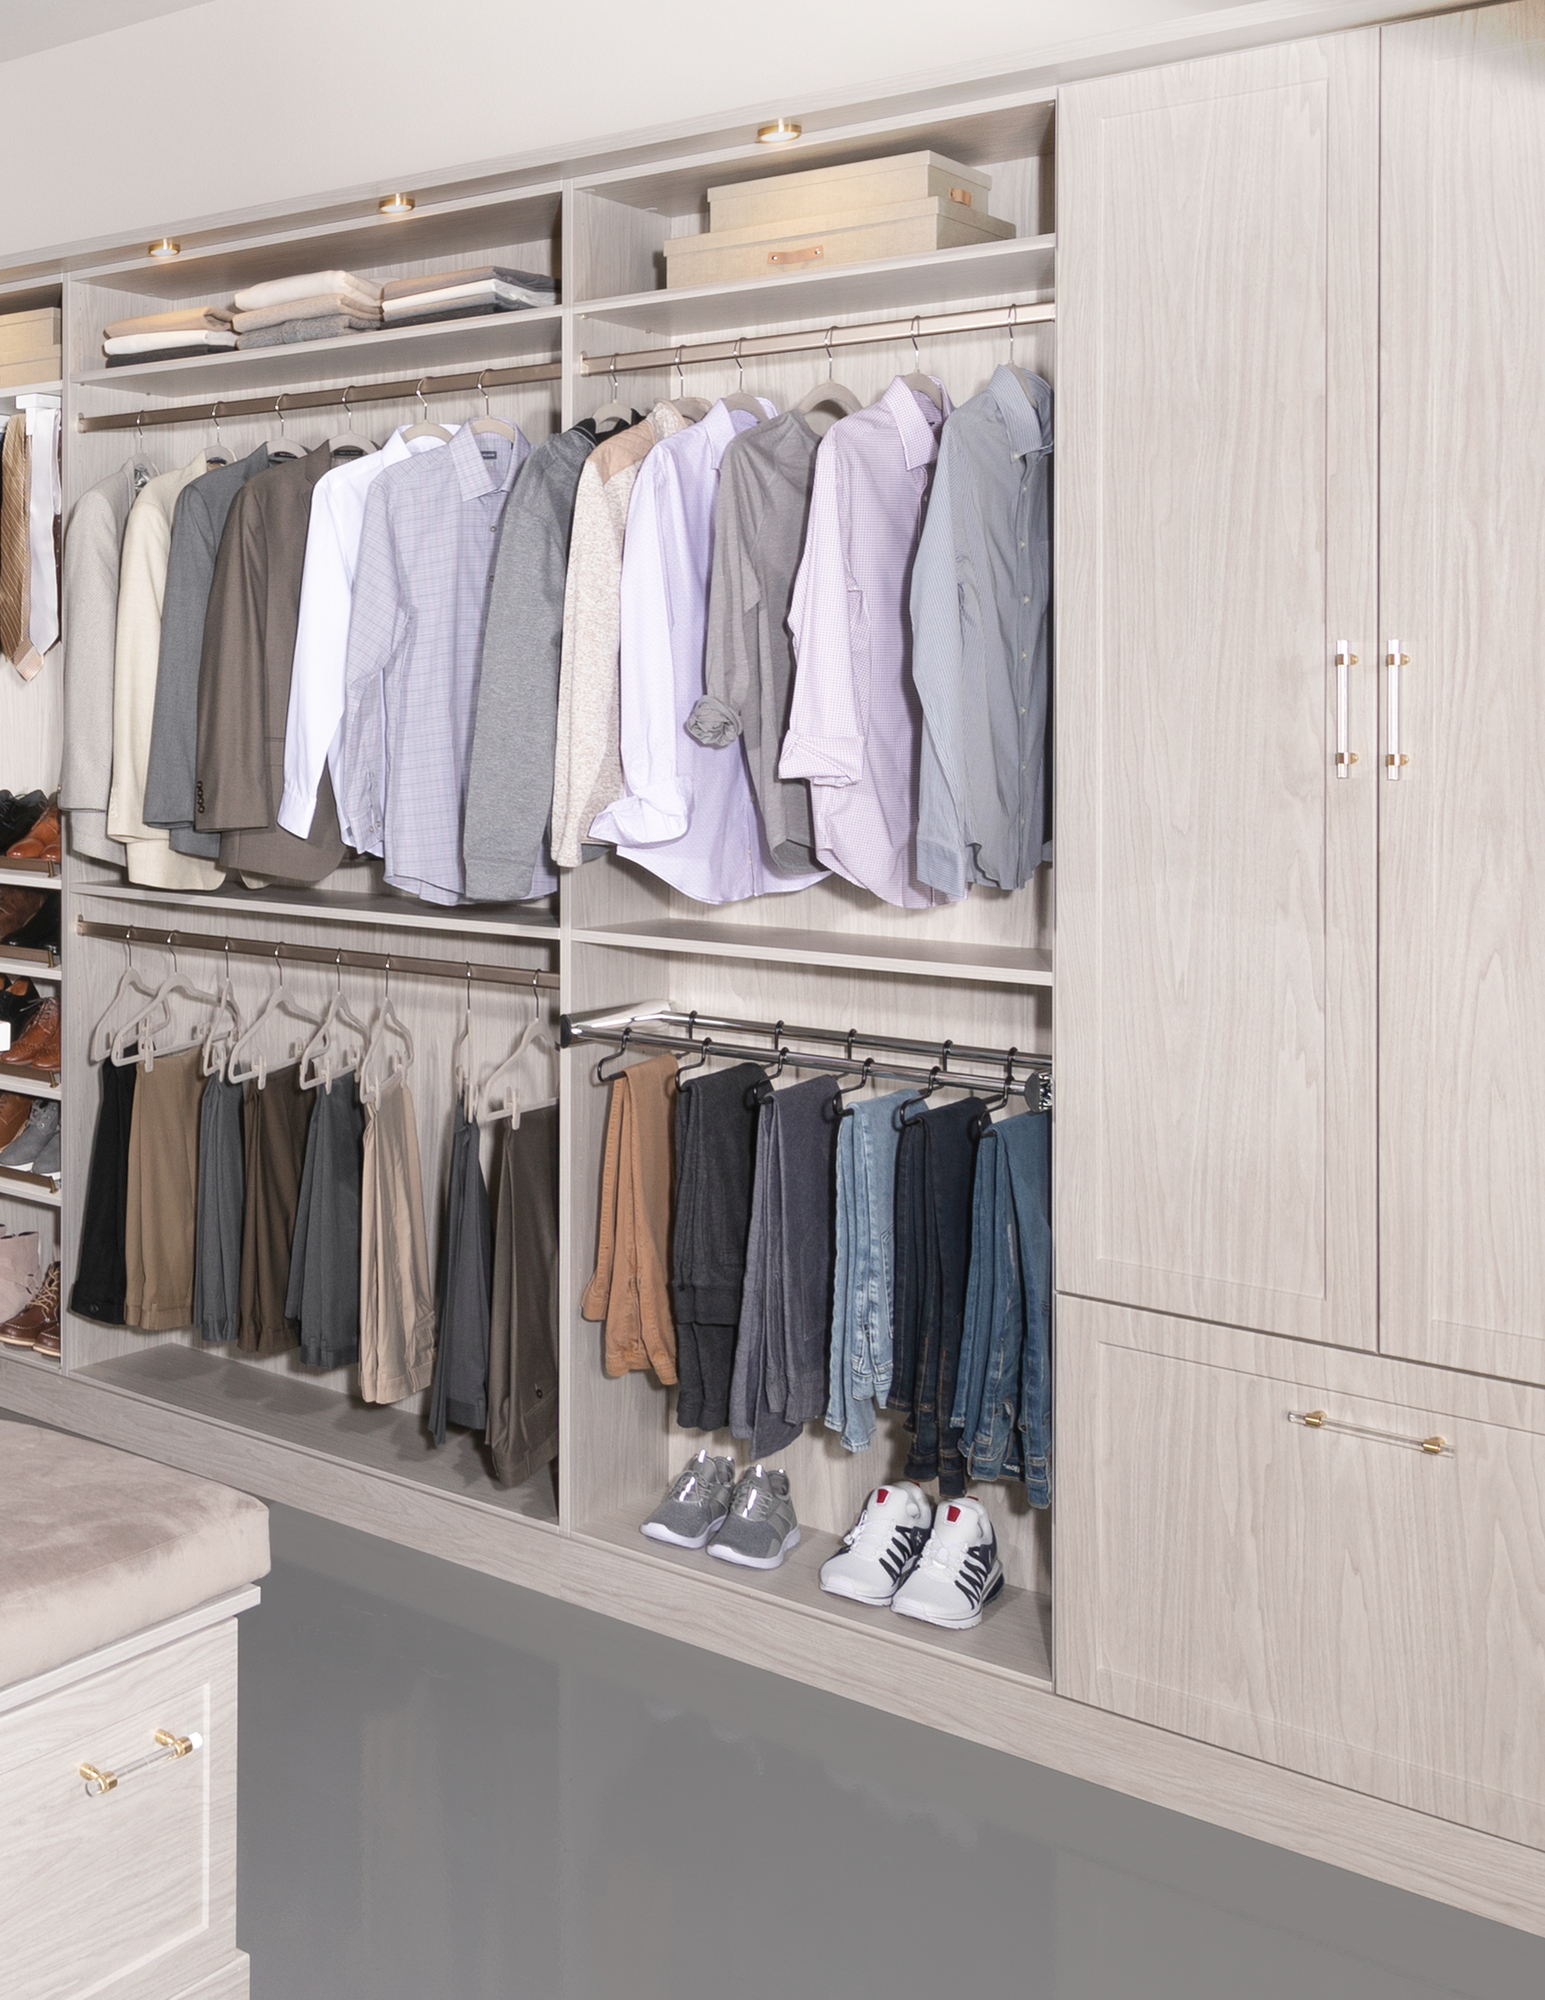 Men’s wardrobe storage in boutique closet system from Inspired Closets